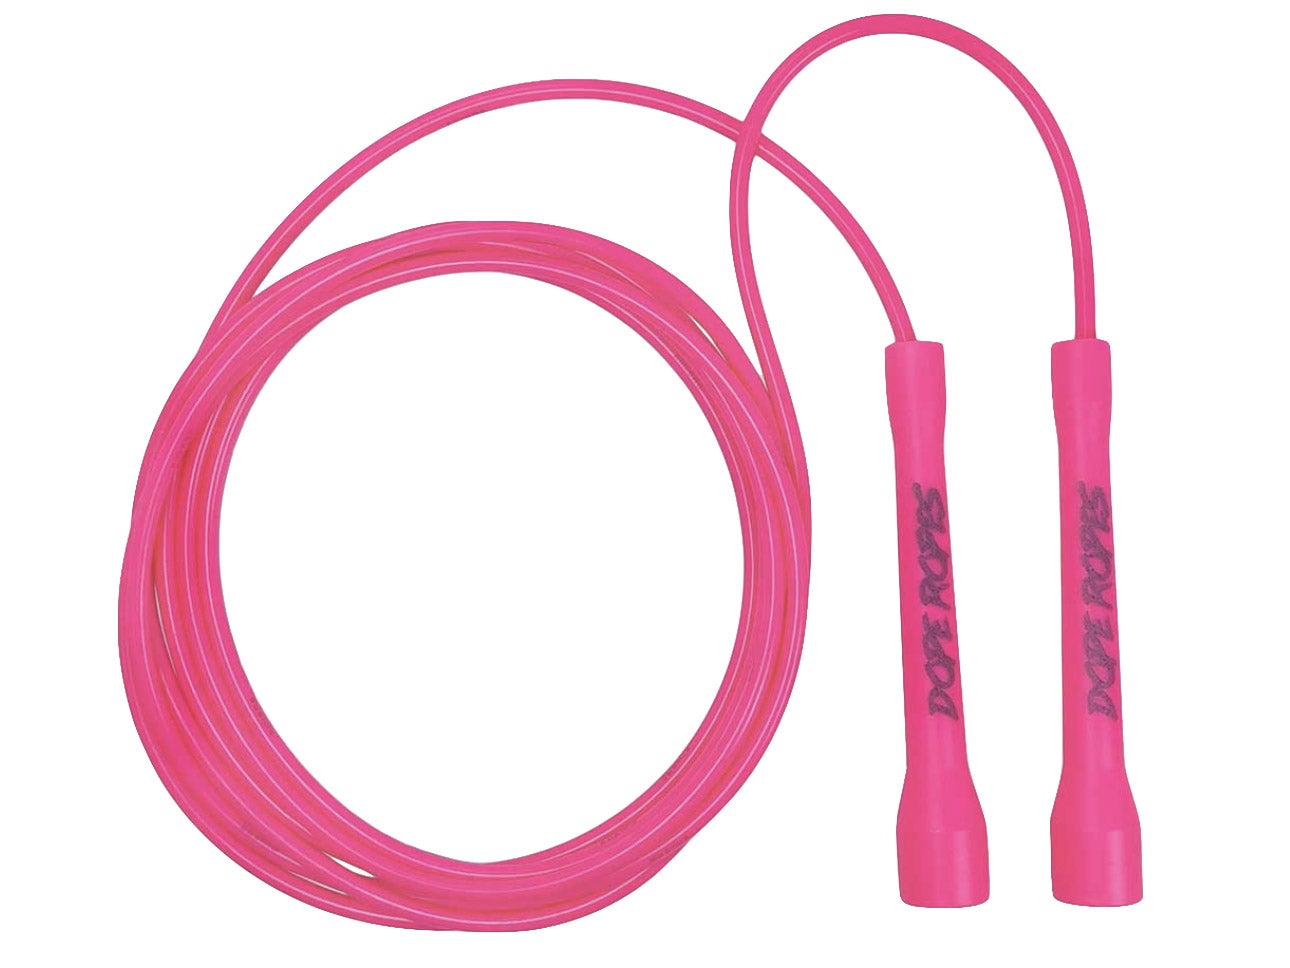 Women Brussels08 Skipping Jump Rope Fitness Aerobic Exercise Indoor Outdoor Fitness Training Home Workouts Pro Sports Skipping Rope for Teens Adults Men 